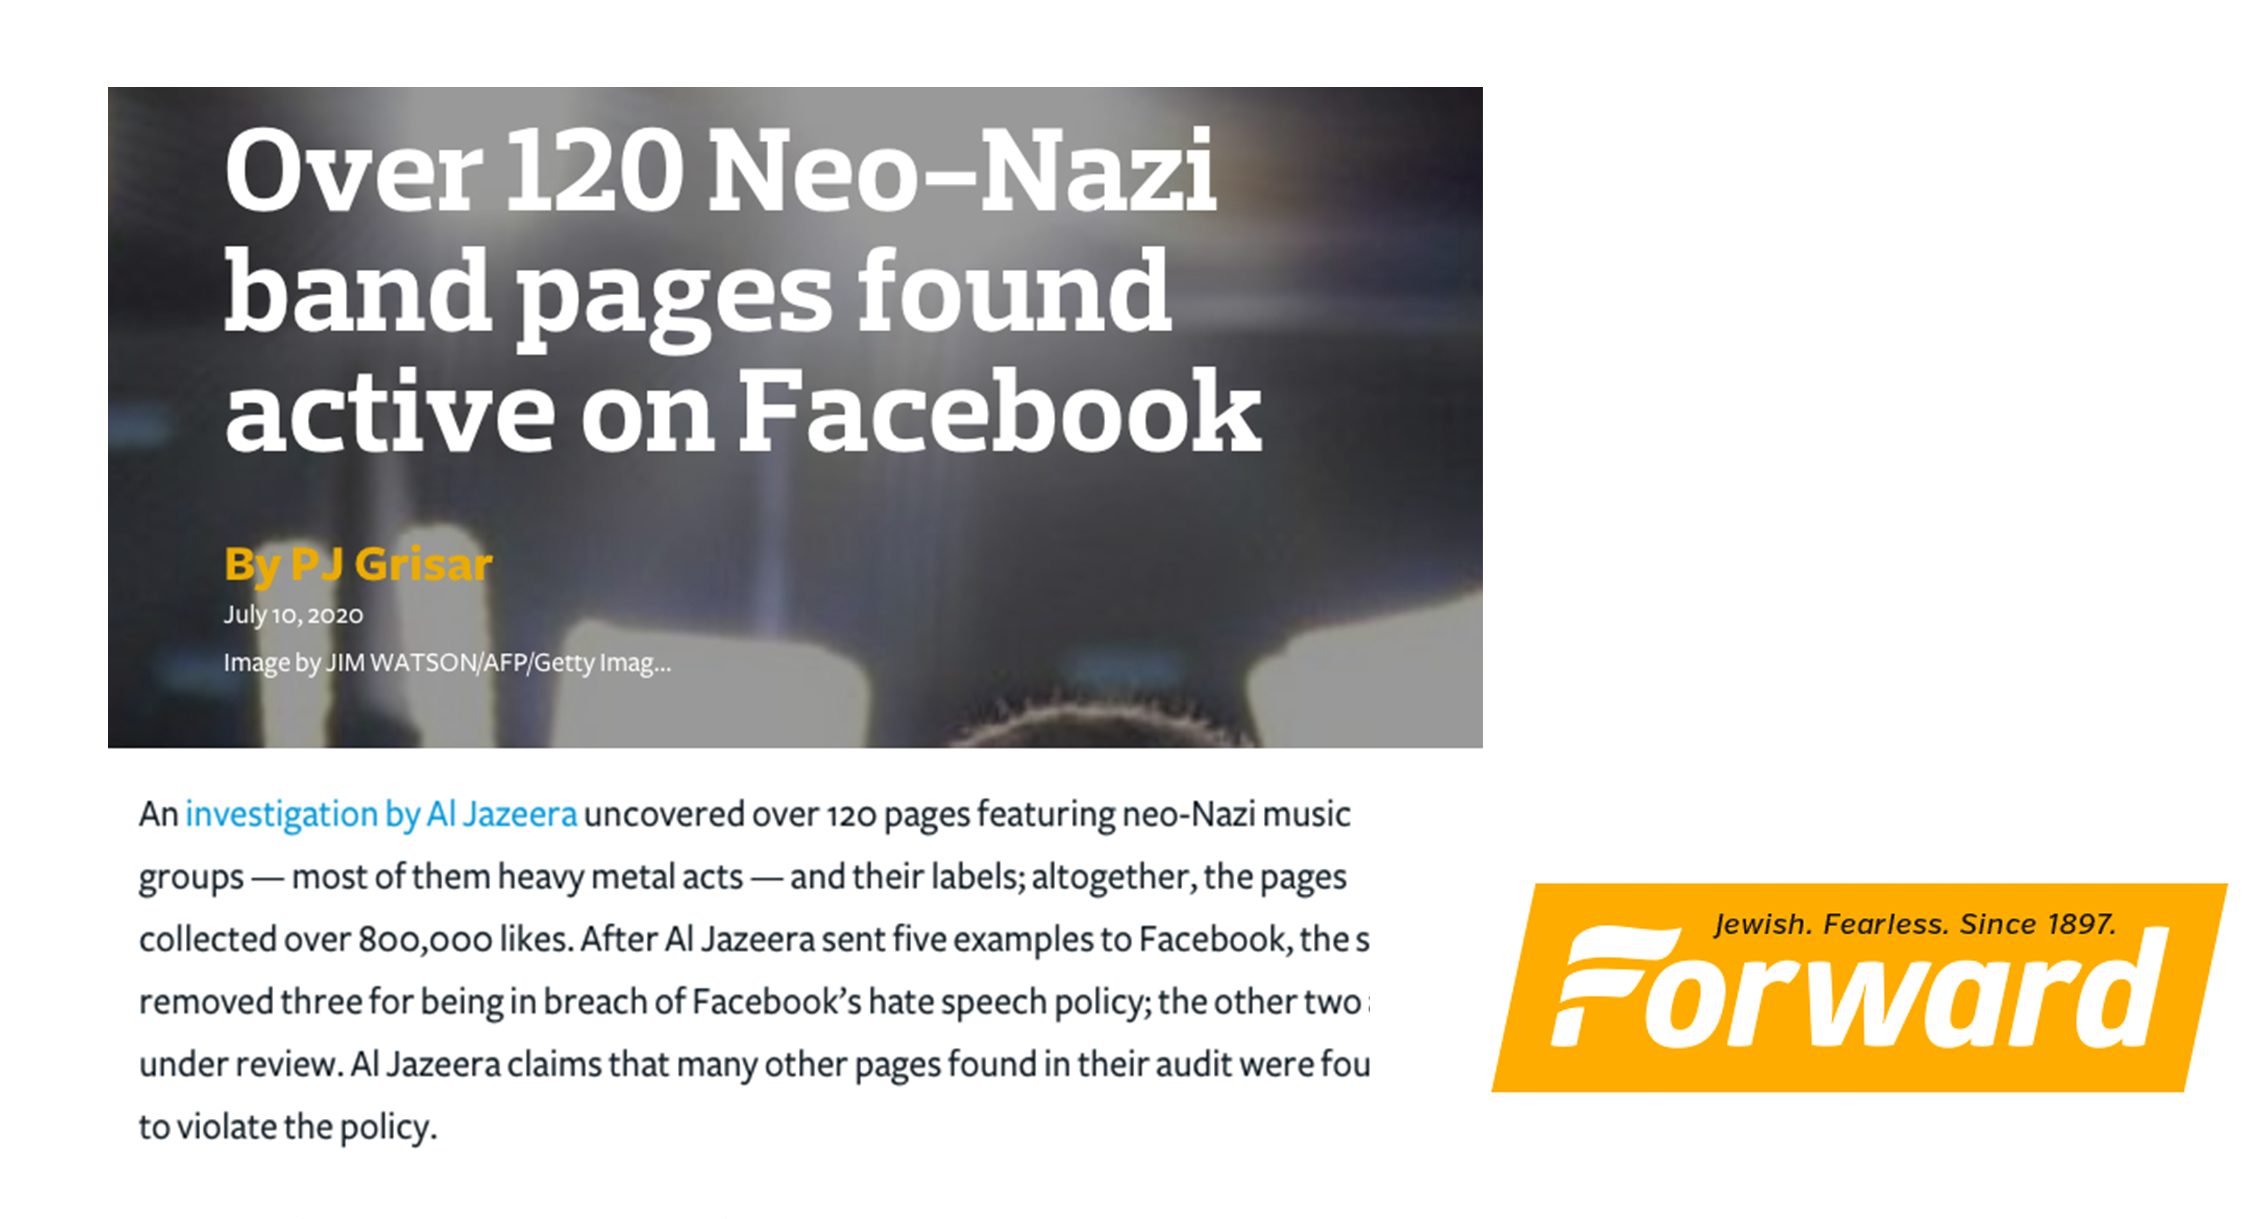 Over 120 Neo-Nazi band pages found active on Facebook